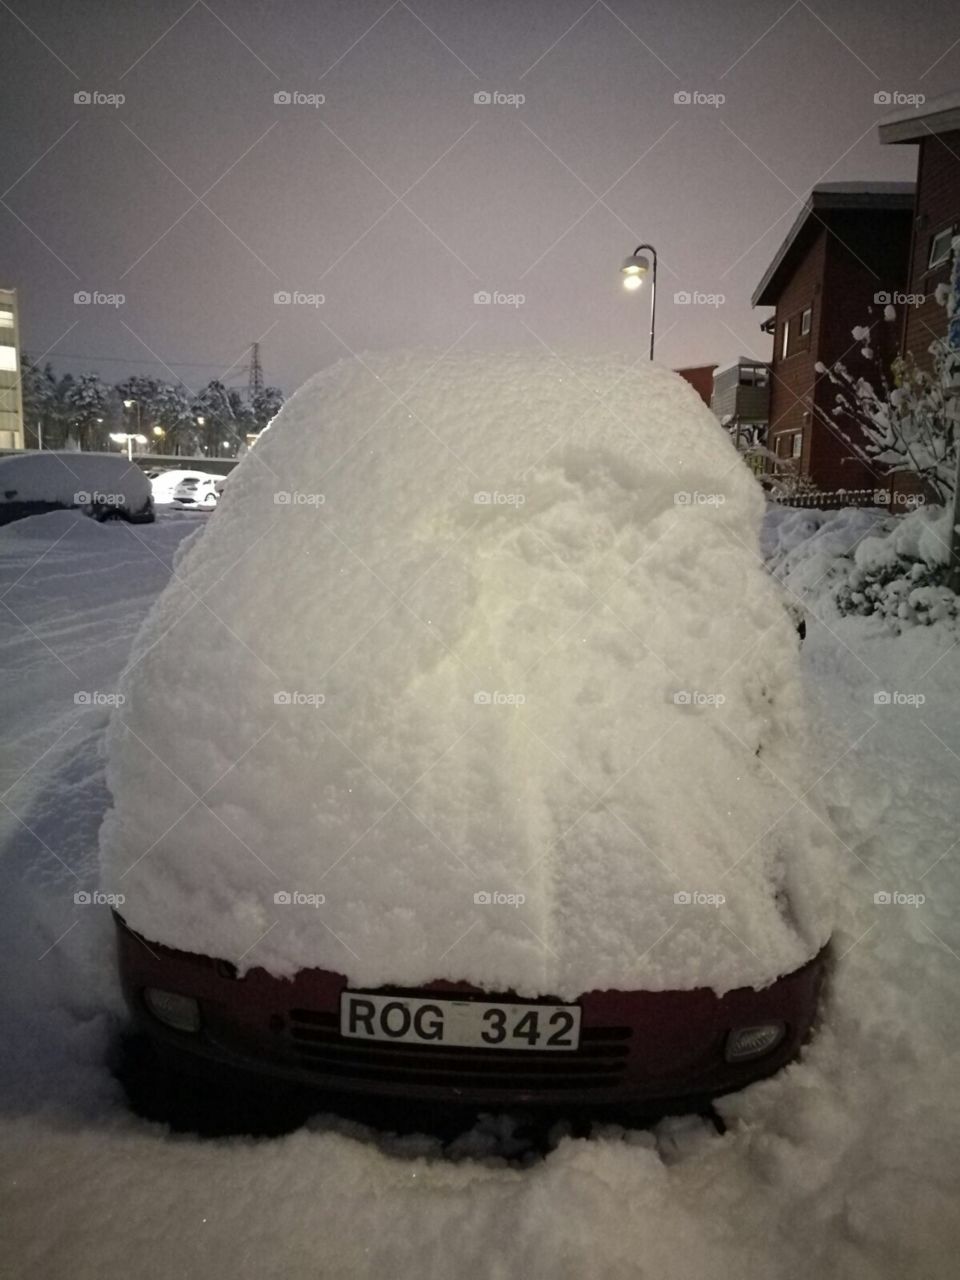 A pic of my car all coverd in snow! it was hard to get in to the car that morning haha.